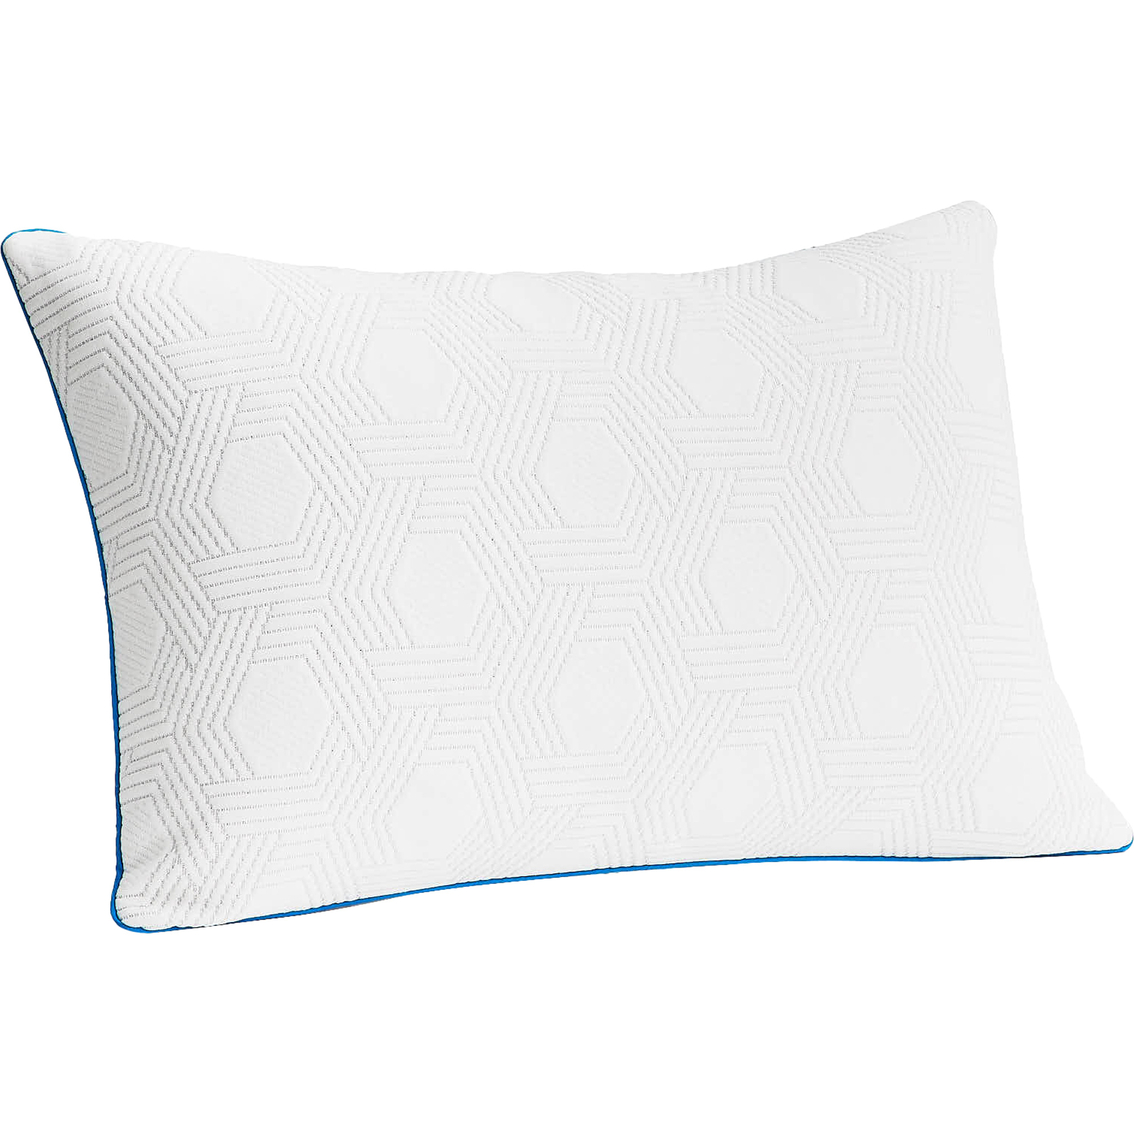 Dr. Oz Stay the Night EngineeredDown Premium Fill Pillow - Image 2 of 10